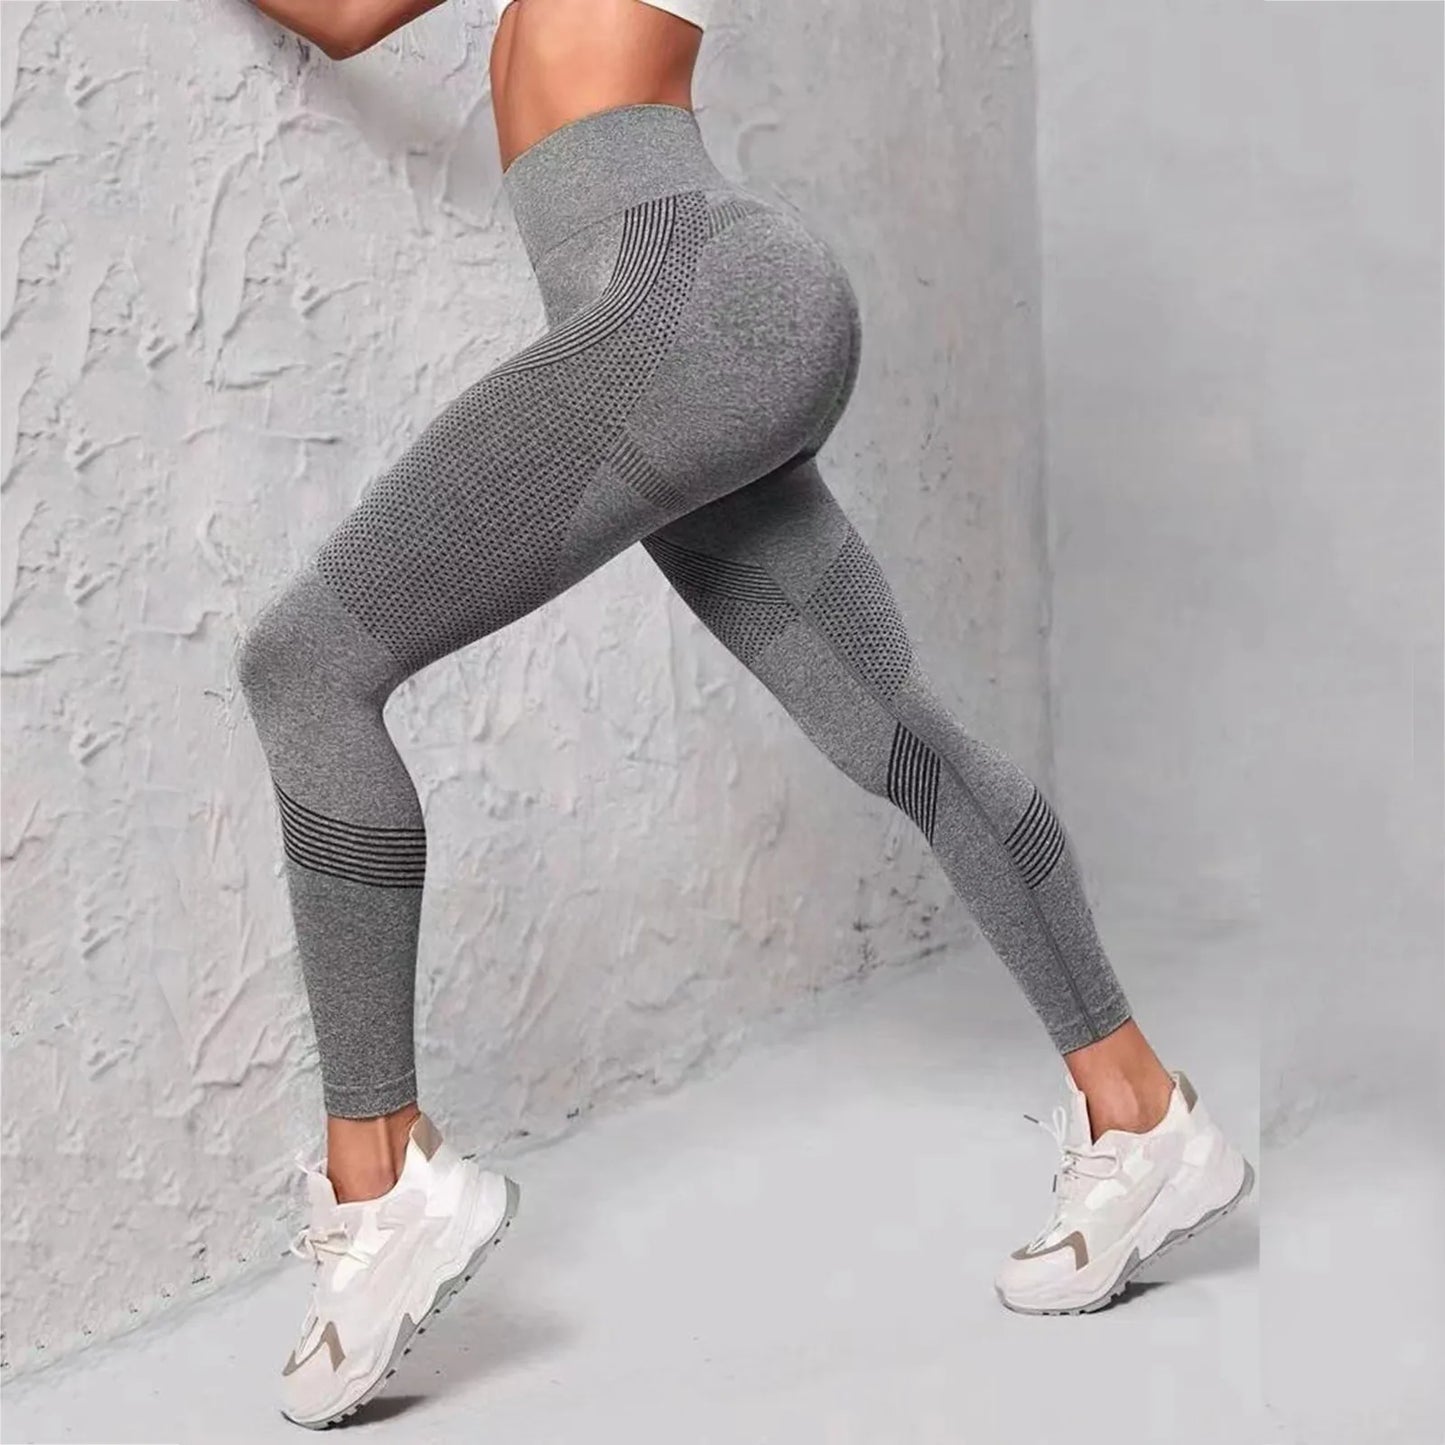 Push Up Sports Pants Legging Female pants Fitness Solid High Waist Sexy Elastic Workout Tights Comfortable Leggings Women